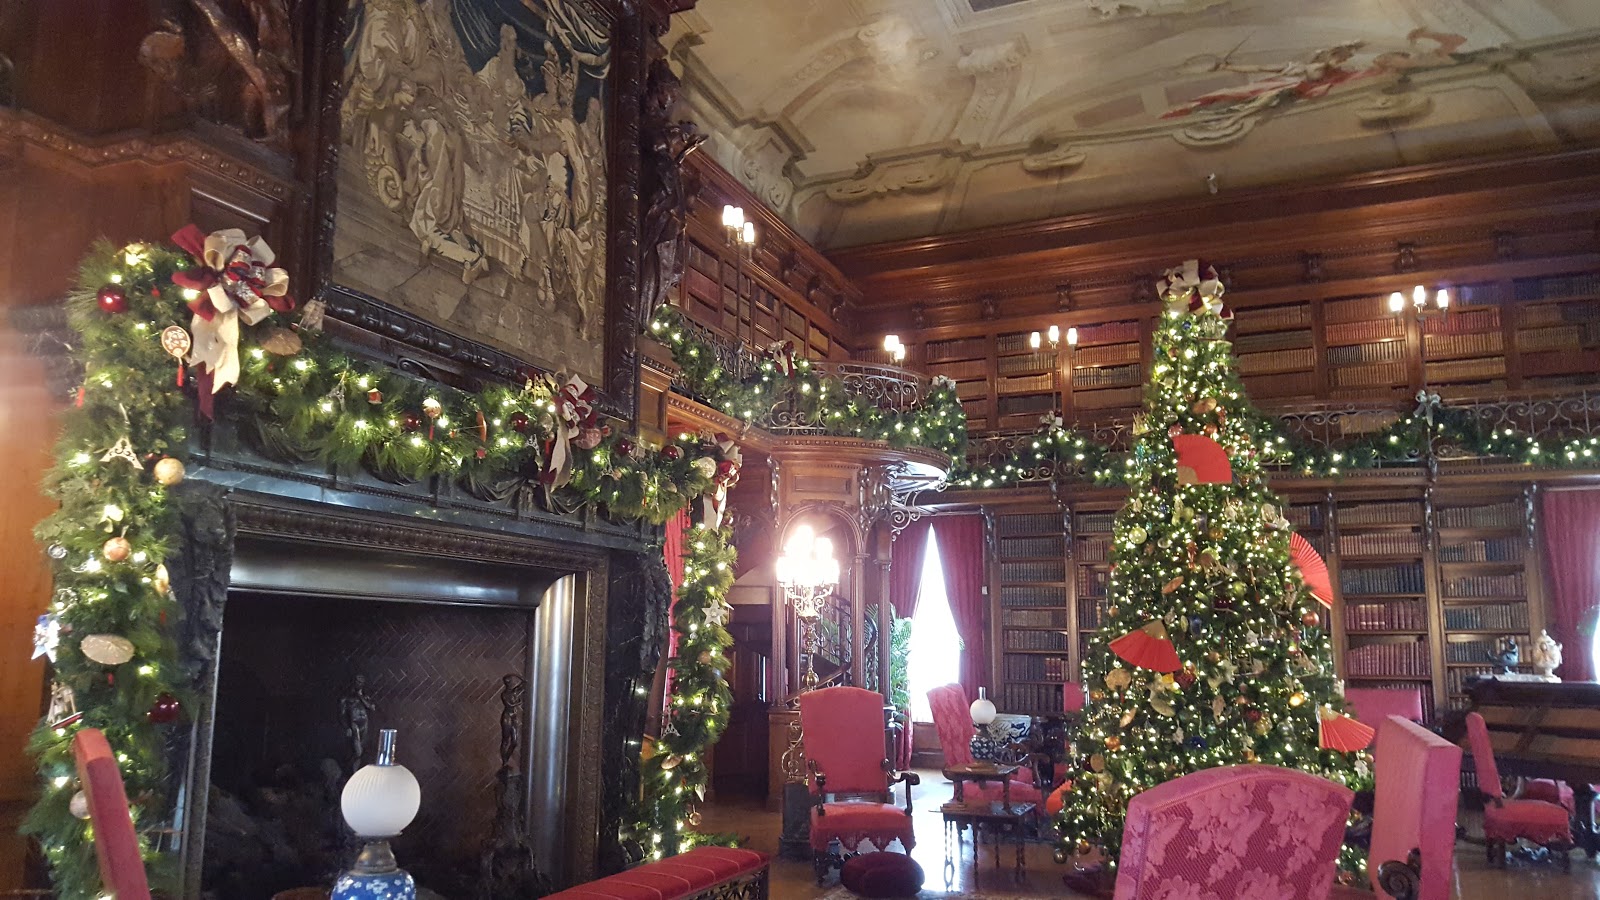 My Patchwork Quilt: CHRISTMAS AT THE BILTMORE ESTATE